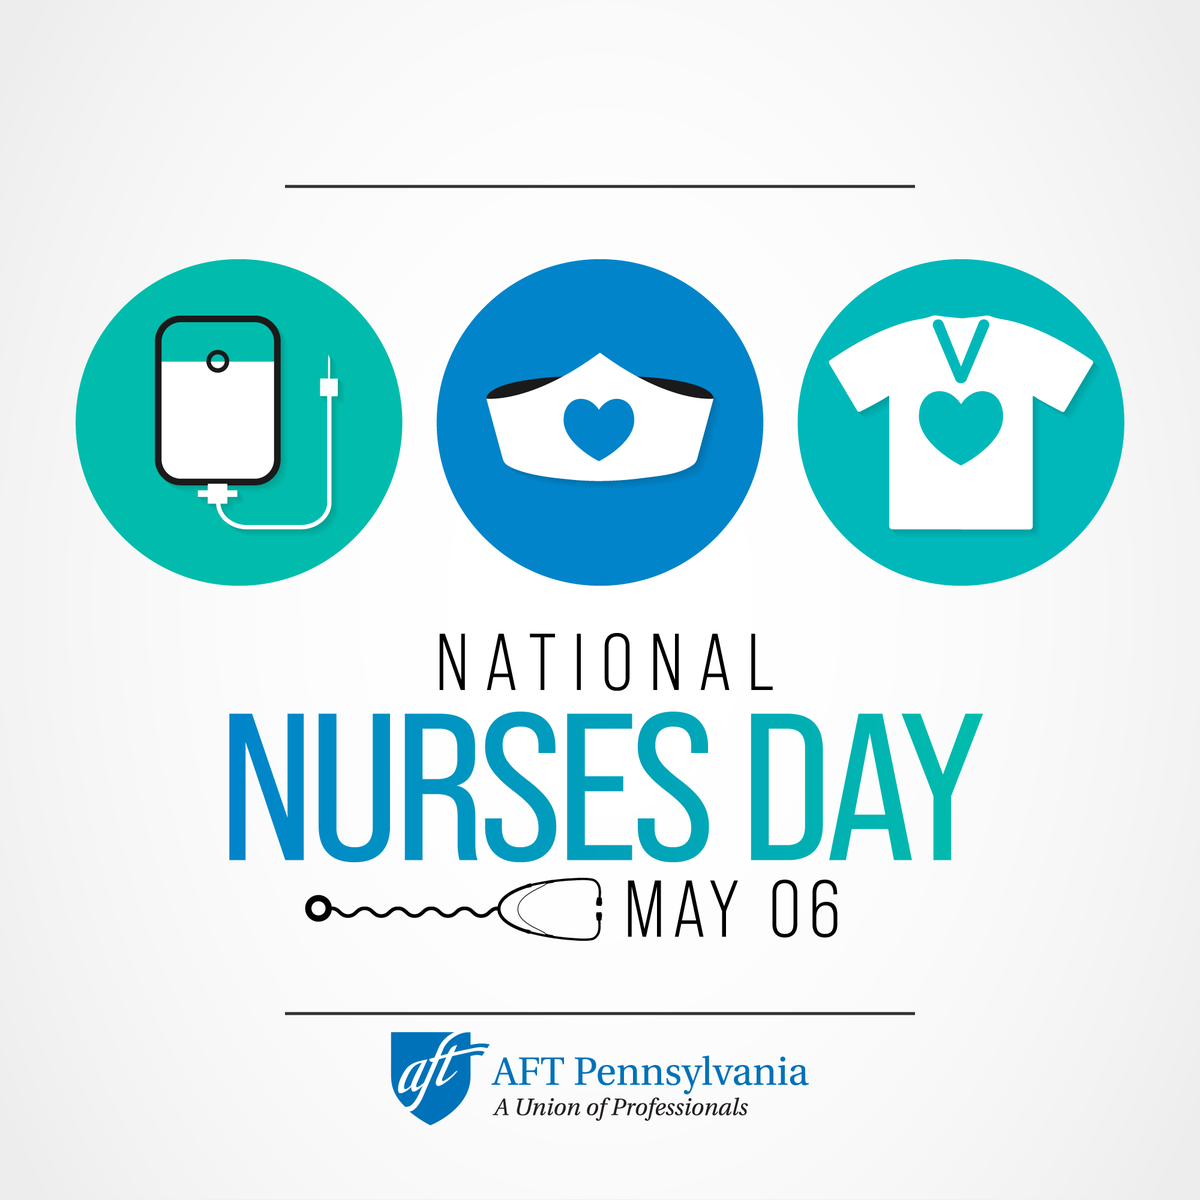 On #NationalNursesDay, we thank you for your service and dedication to keeping us all healthy!